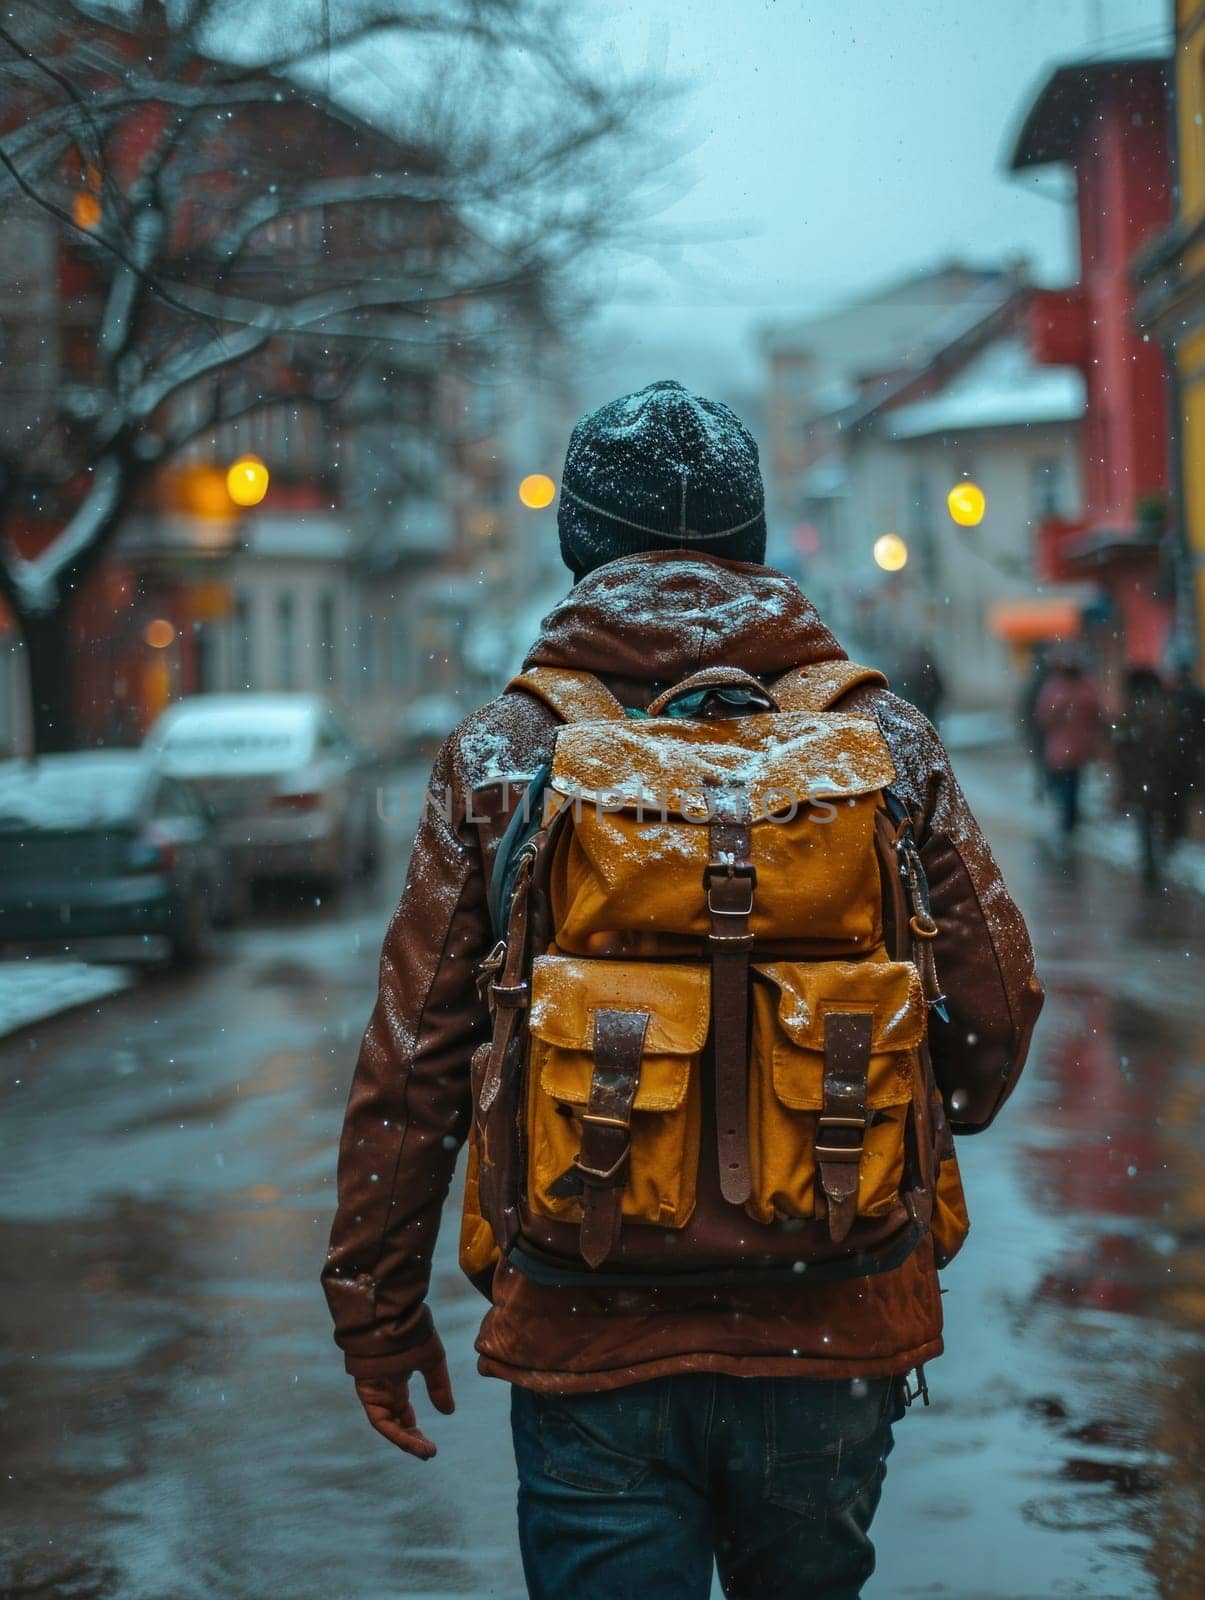 A man with a backpack walking down the street in snow